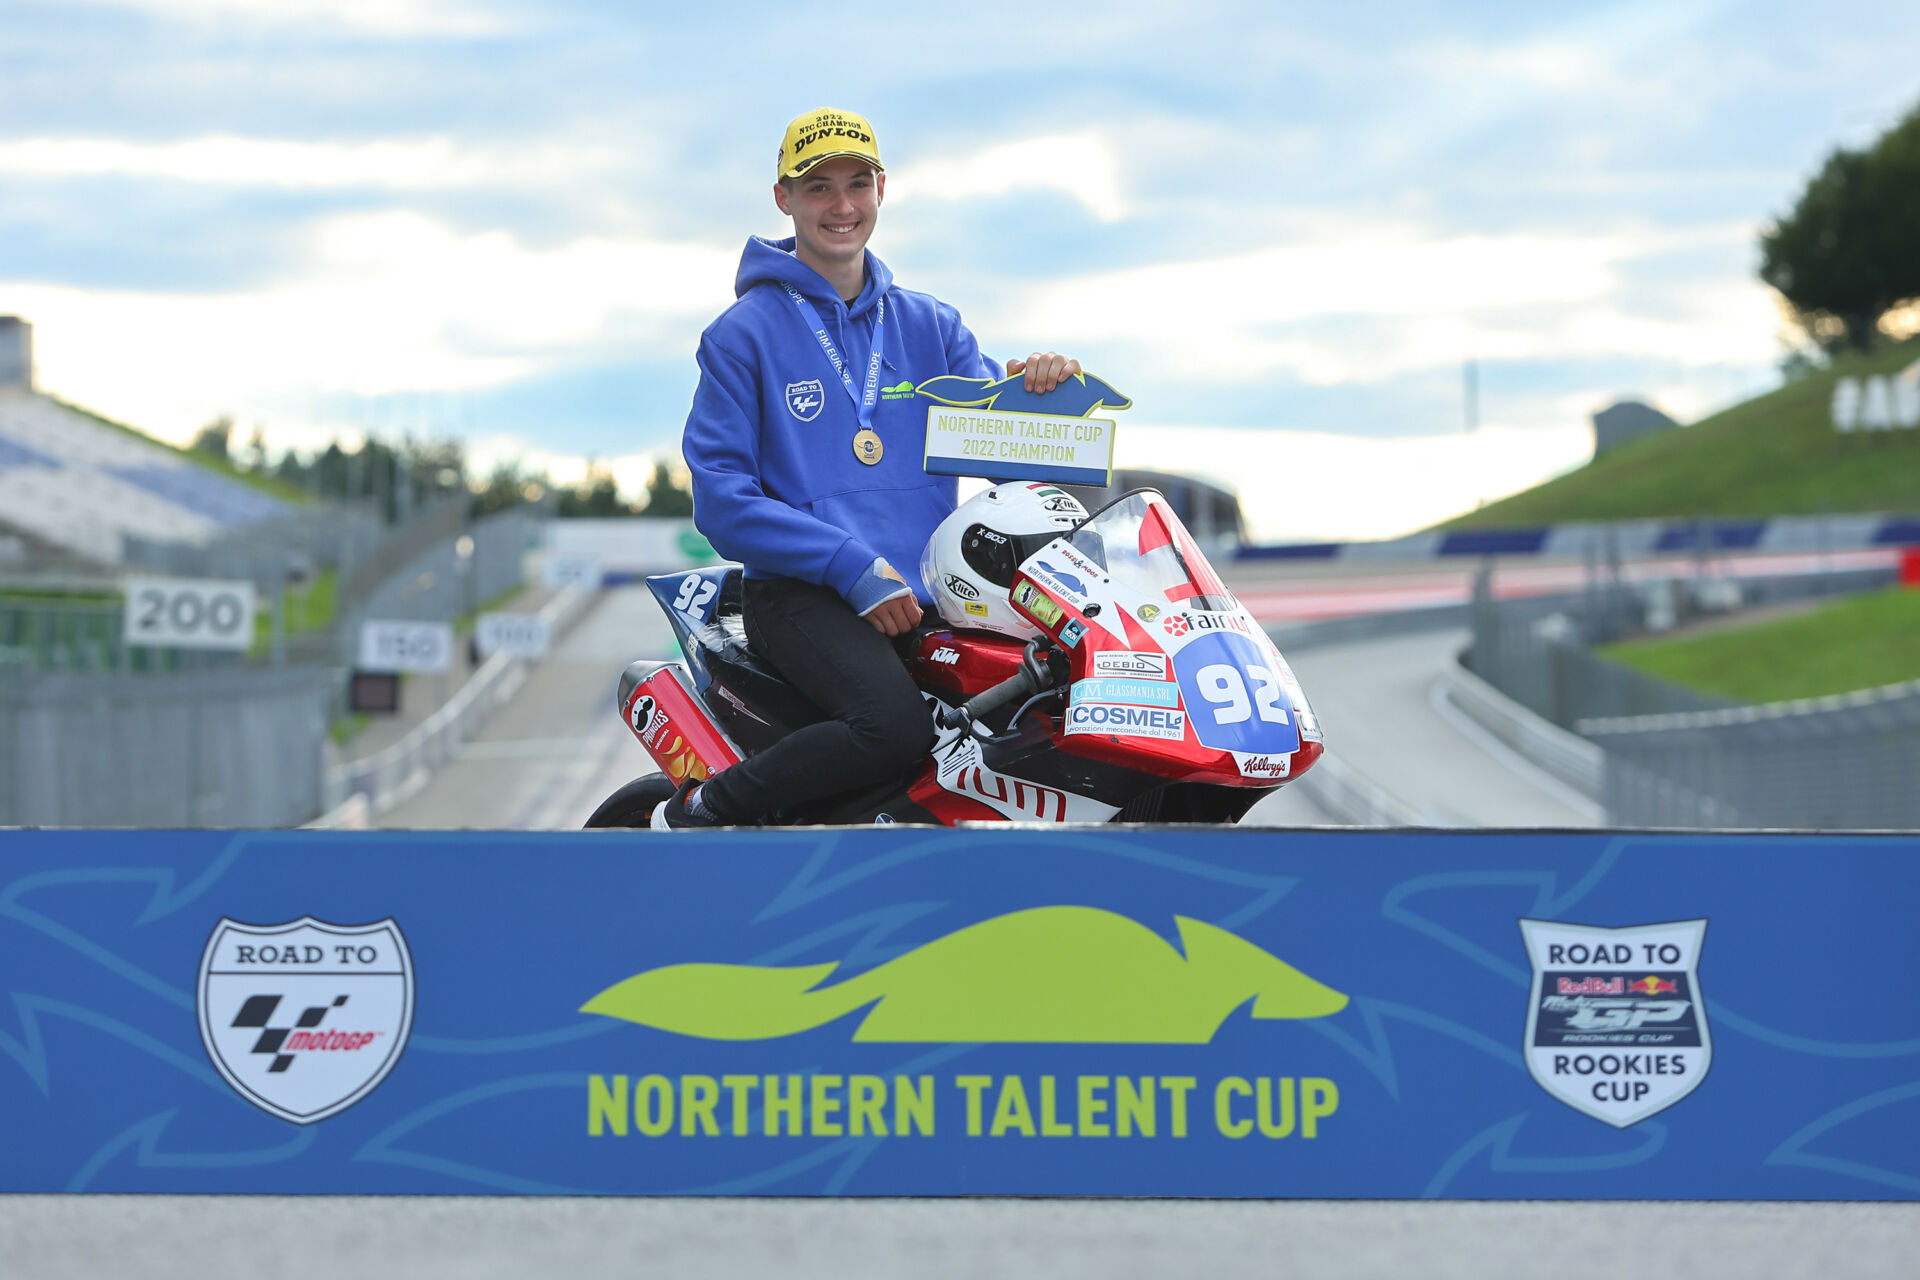 2022 Northern Talent Cup Champion Rossi Moor. Photo courtesy Northern Talent Cup.